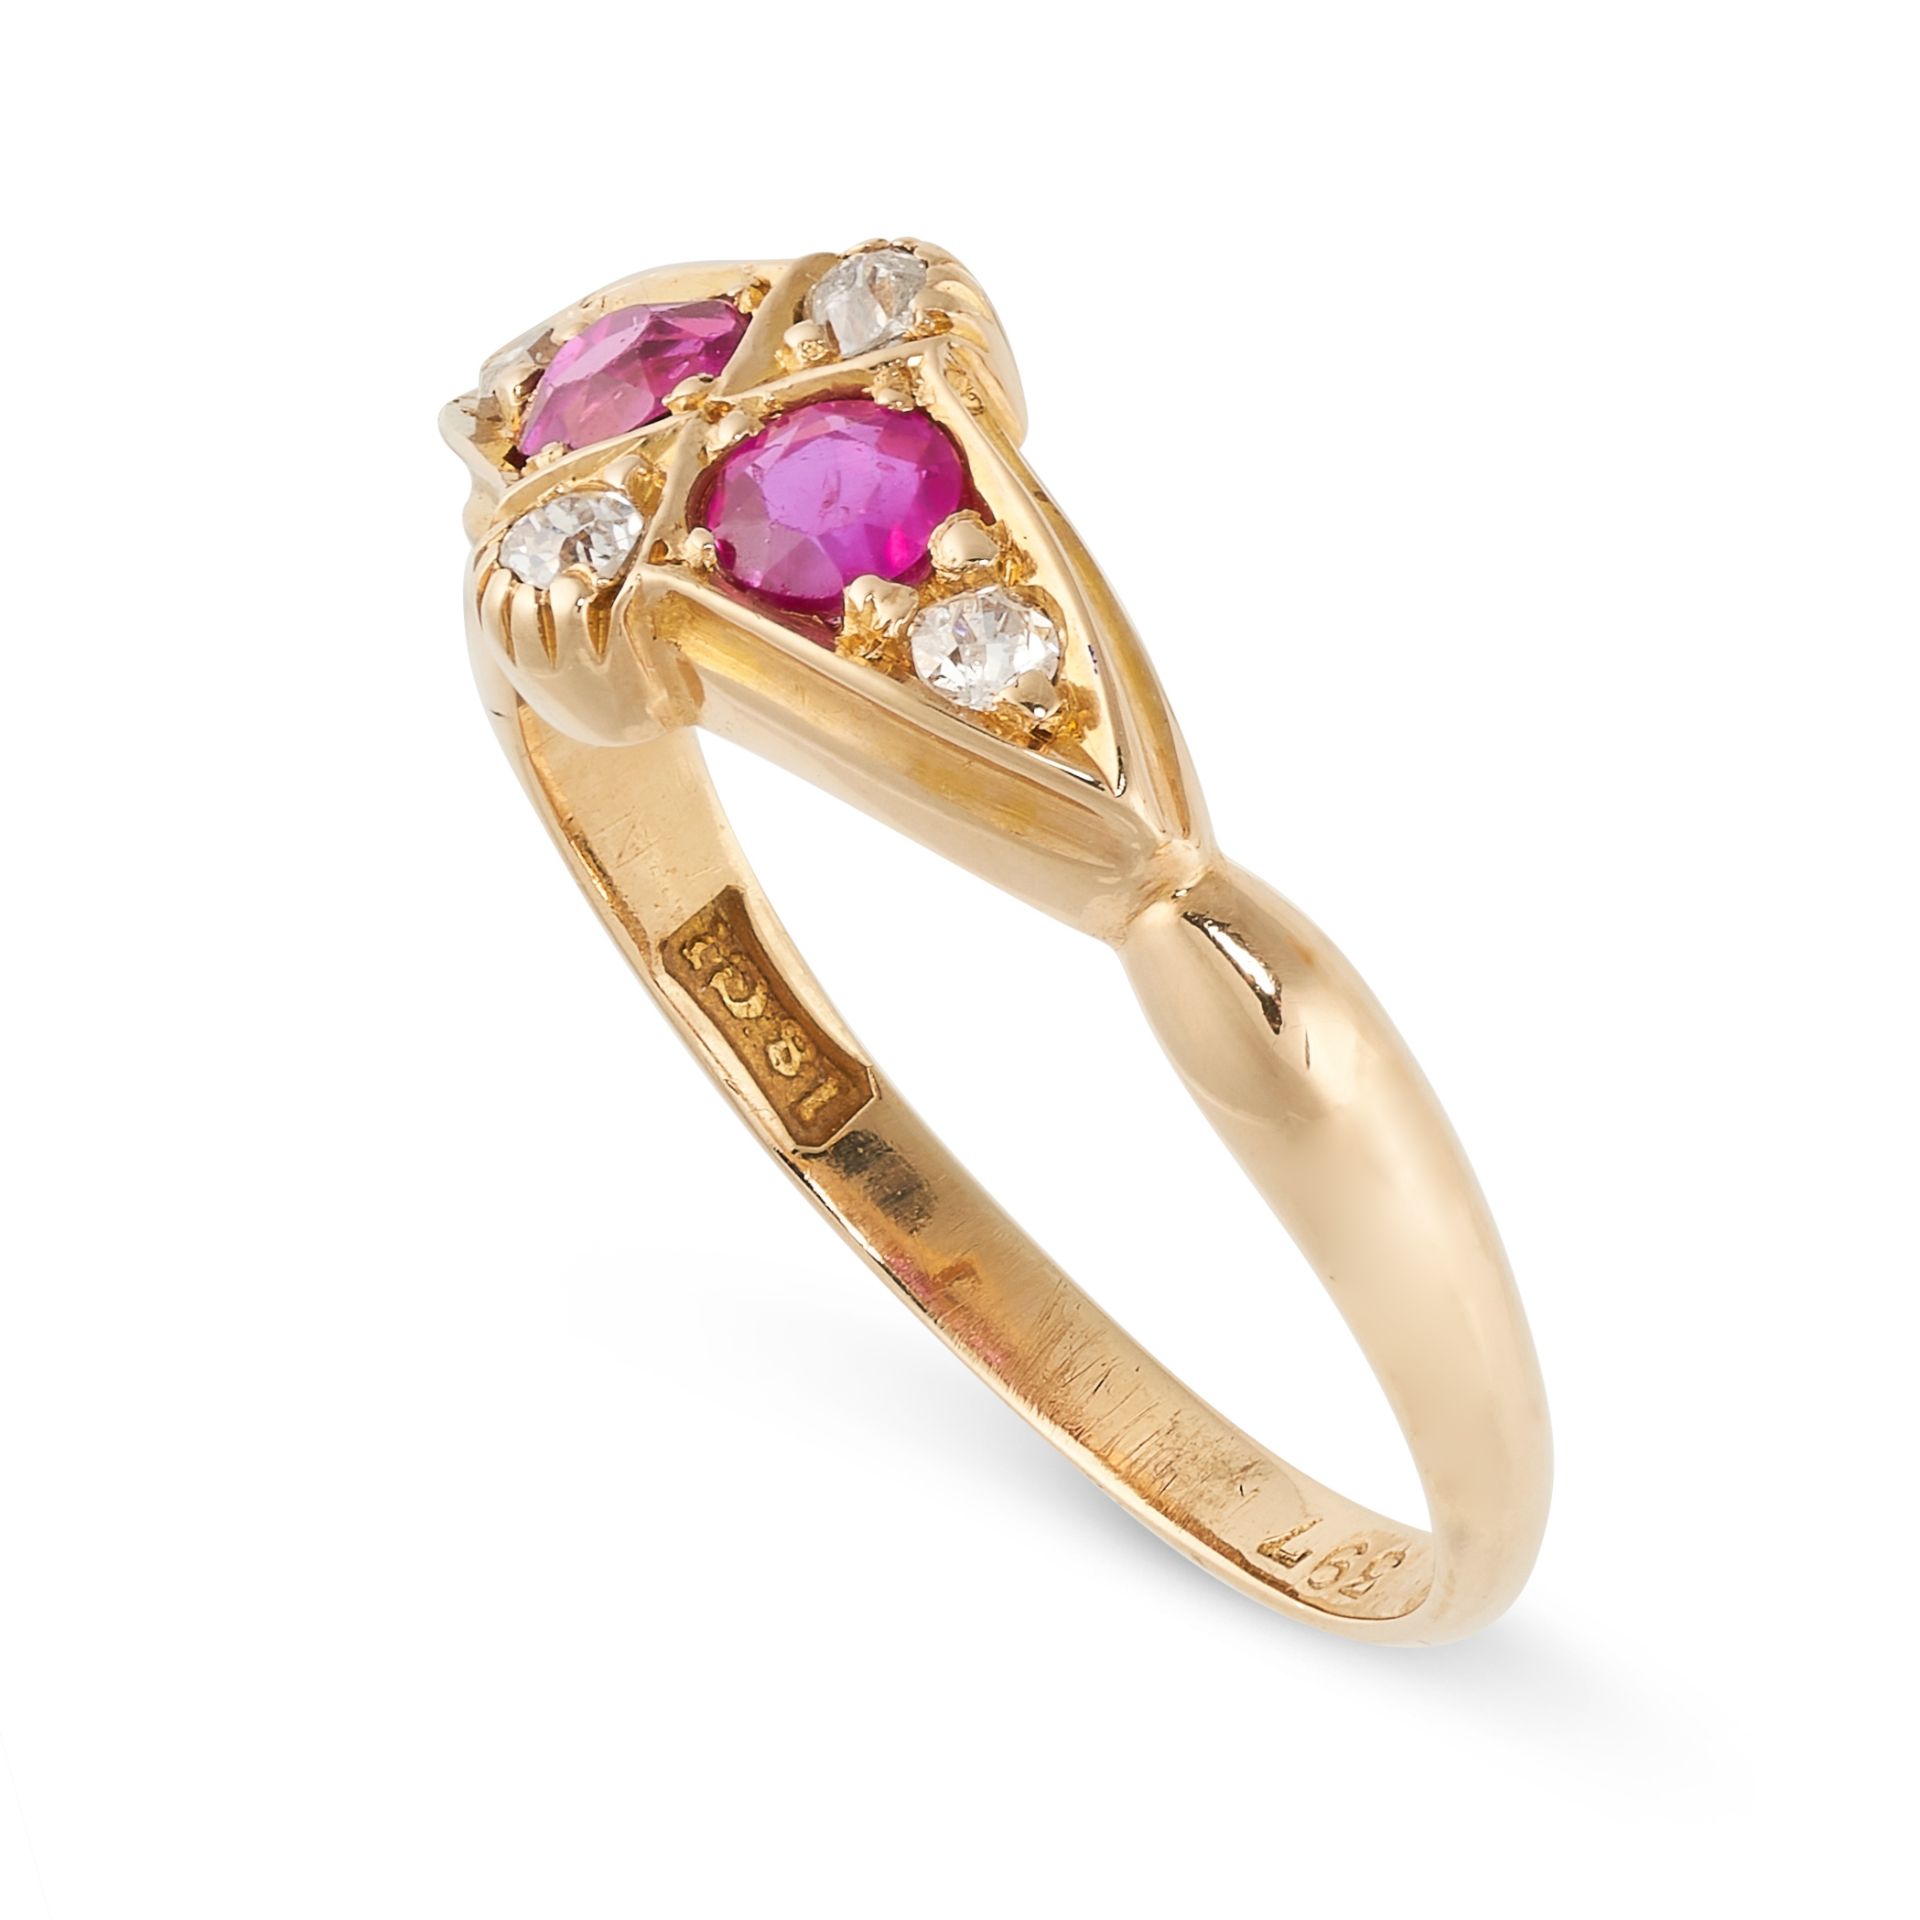 NO RESERVE - AN ANTIQUE RUBY AND DIAMOND RING in 18ct yellow gold, set with two round cut rubies and - Image 2 of 2